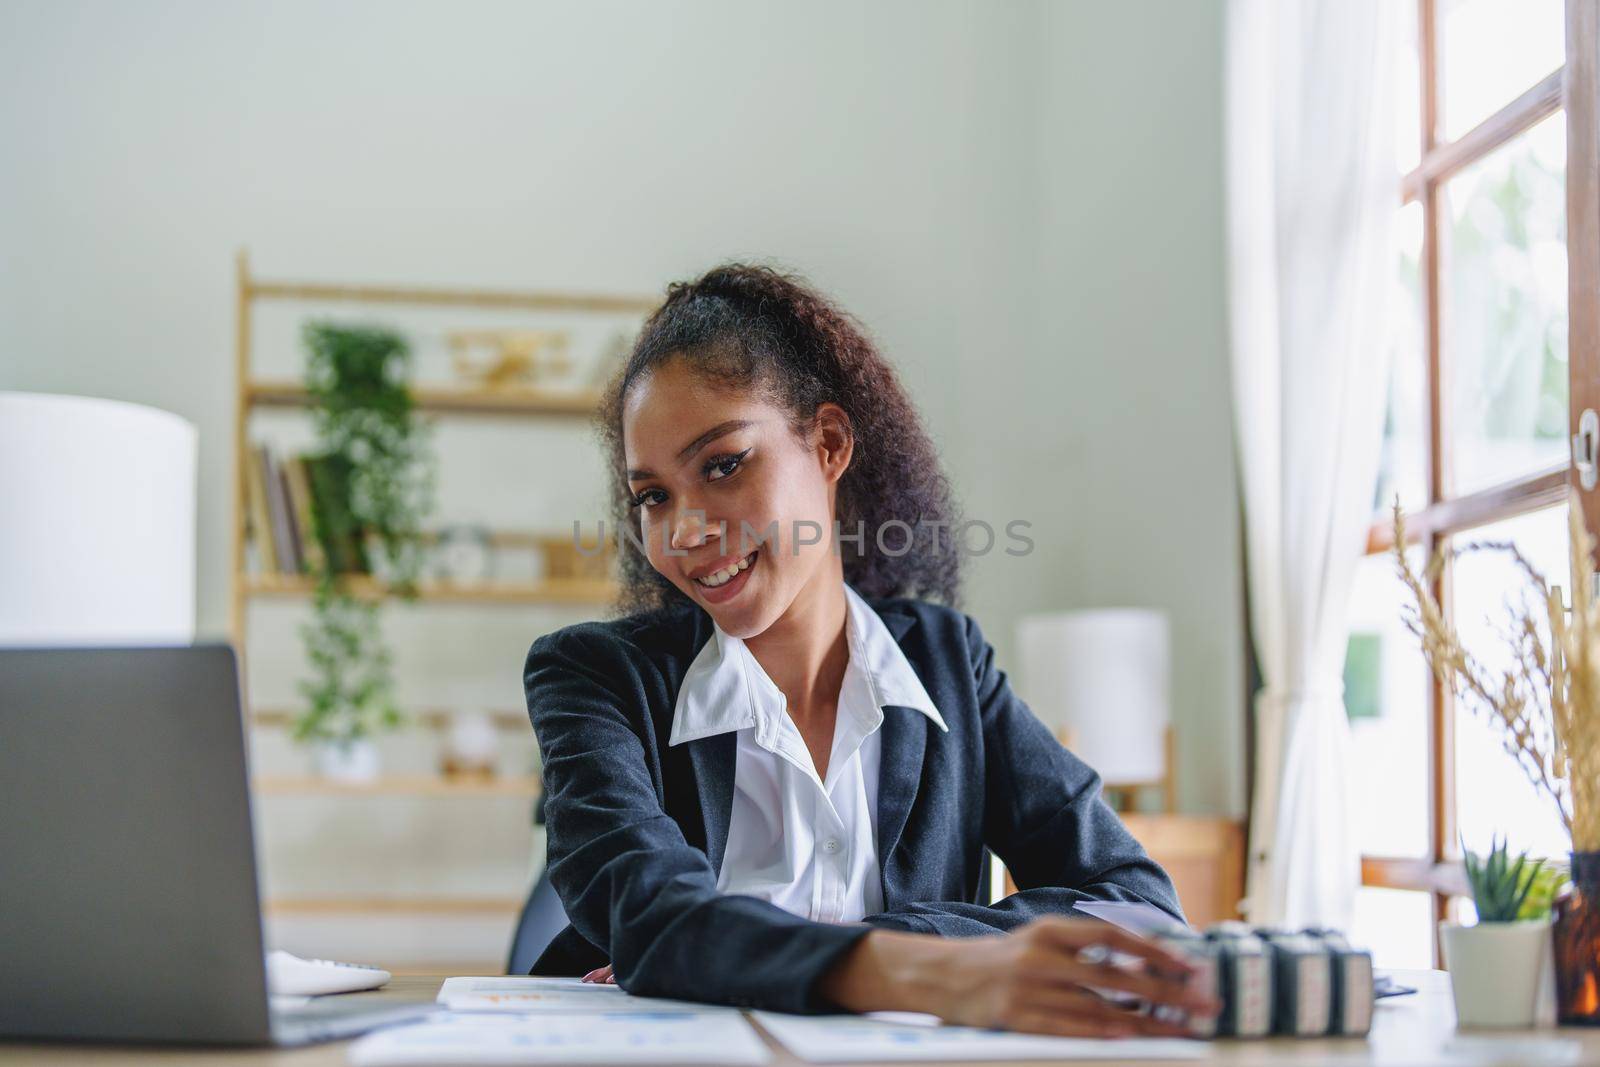 A portrait of an African Americans businesswoman showing a smile on her face as she works to increase the profits of her own business